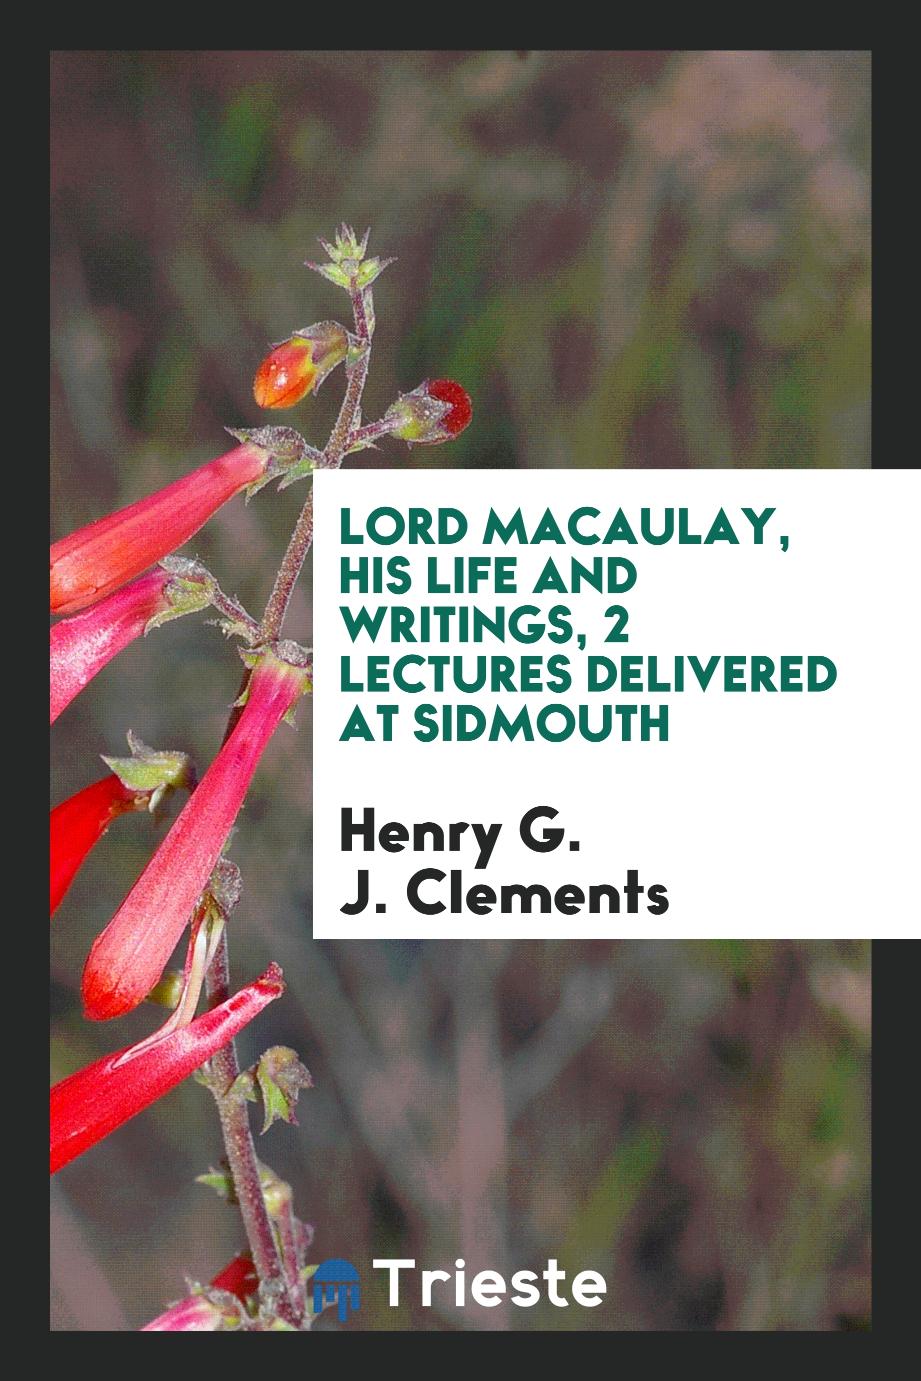 Lord Macaulay, His Life and Writings, 2 Lectures Delivered at Sidmouth